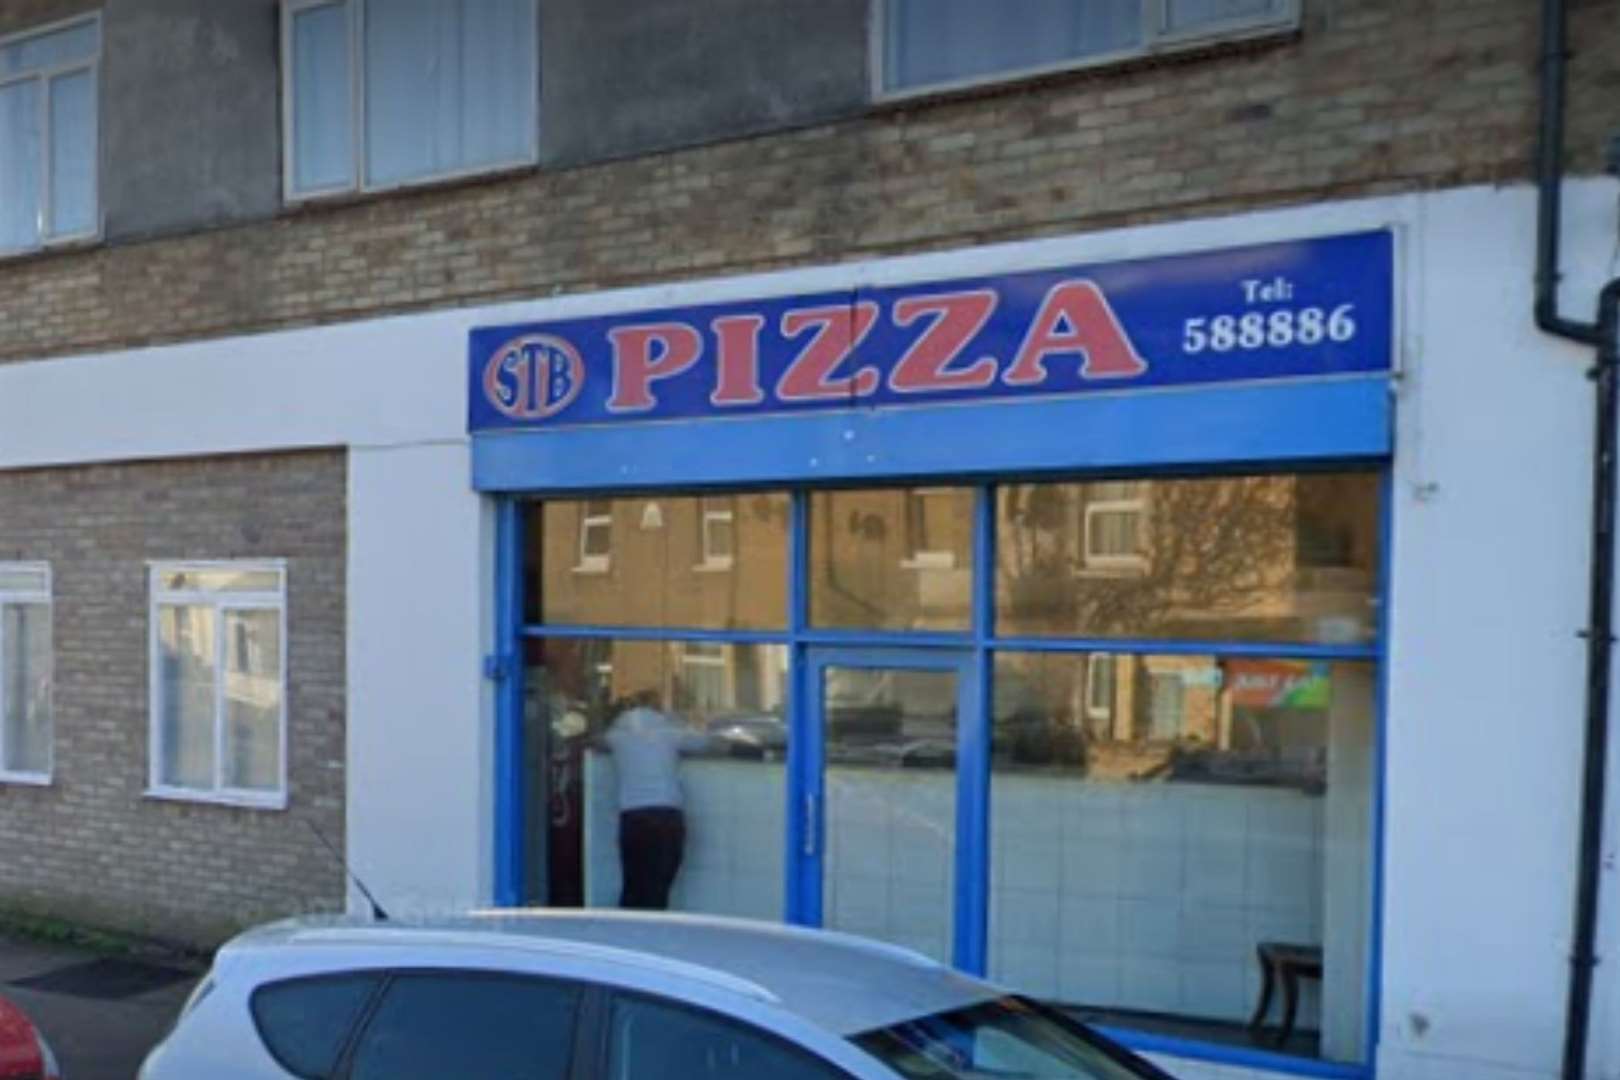 STB Pizza in Ramsgate has a one-star food hygiene rating